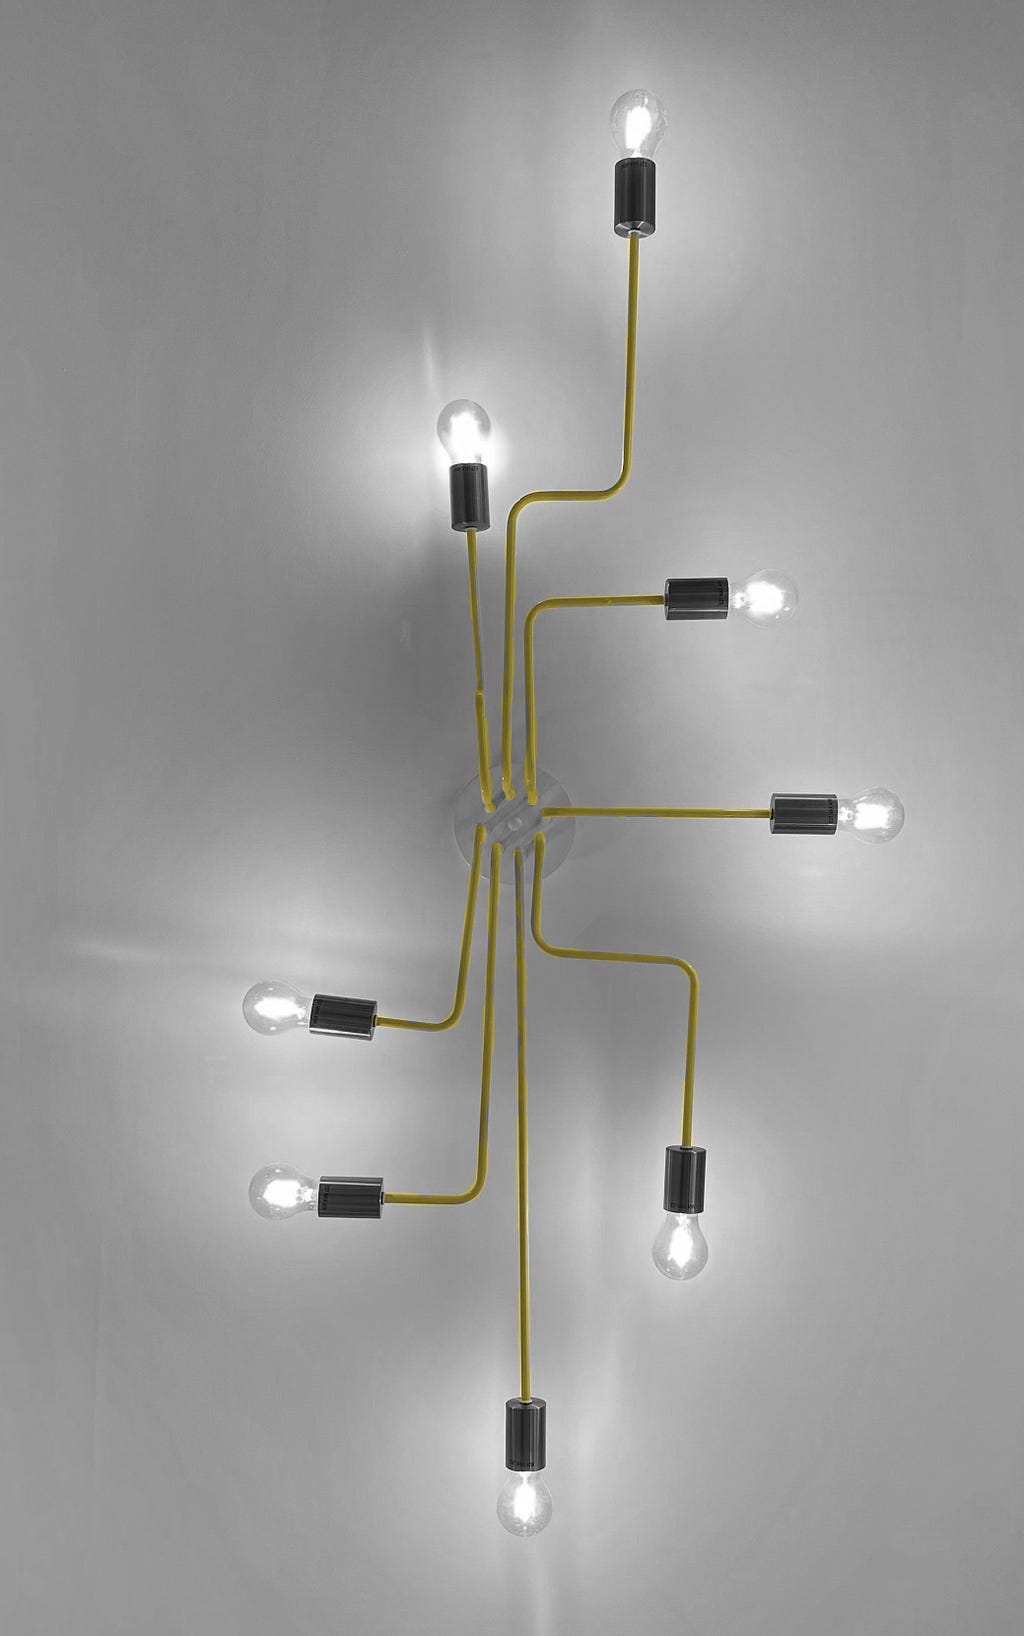 An image of a light fixture with multiple bulbs. All of the lights are connected with straight or bent lines to the plug.